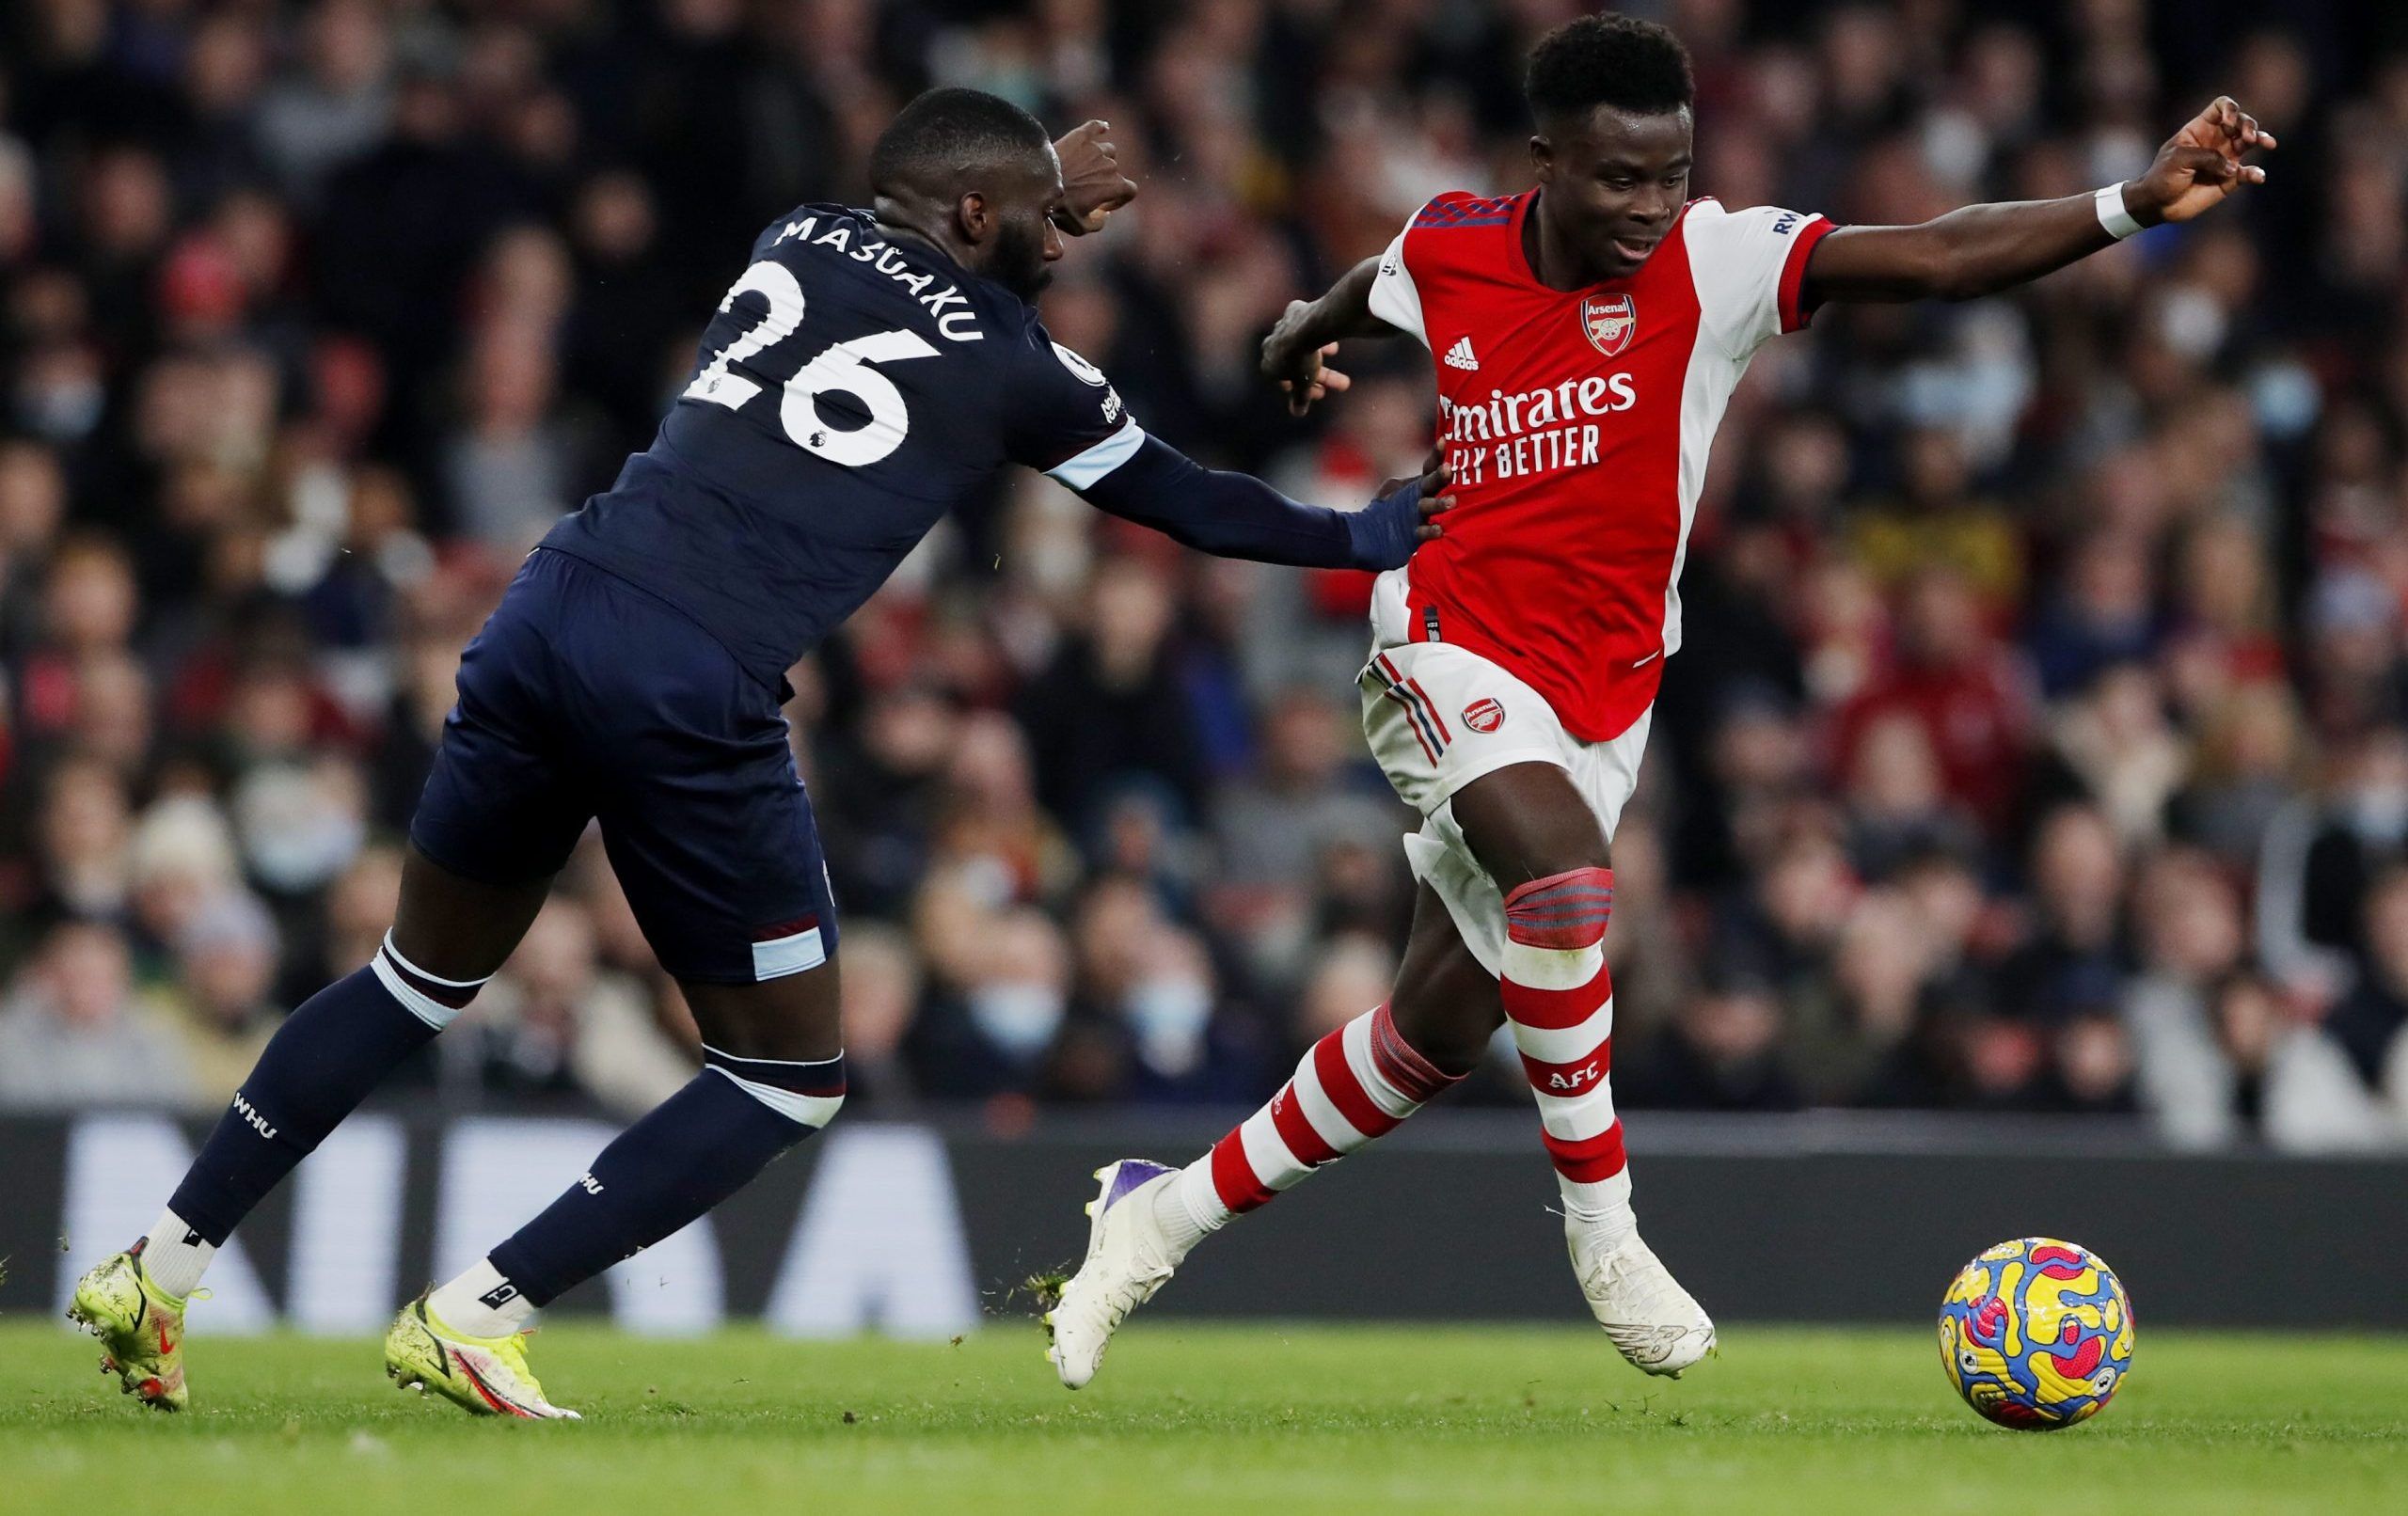 Soccer Football - Premier League - Arsenal v West Ham United - Emirates Stadium, London, Britain - December 15, 2021 Arsenal's Bukayo Saka in action with West Ham United's Arthur Masuaku Action Images via Reuters/Andrew Couldridge EDITORIAL USE ONLY. No use with unauthorized audio, video, data, fixture lists, club/league logos or 'live' services. Online in-match use limited to 75 images, no video emulation. No use in betting, games or single club /league/player publications.  Please contact your